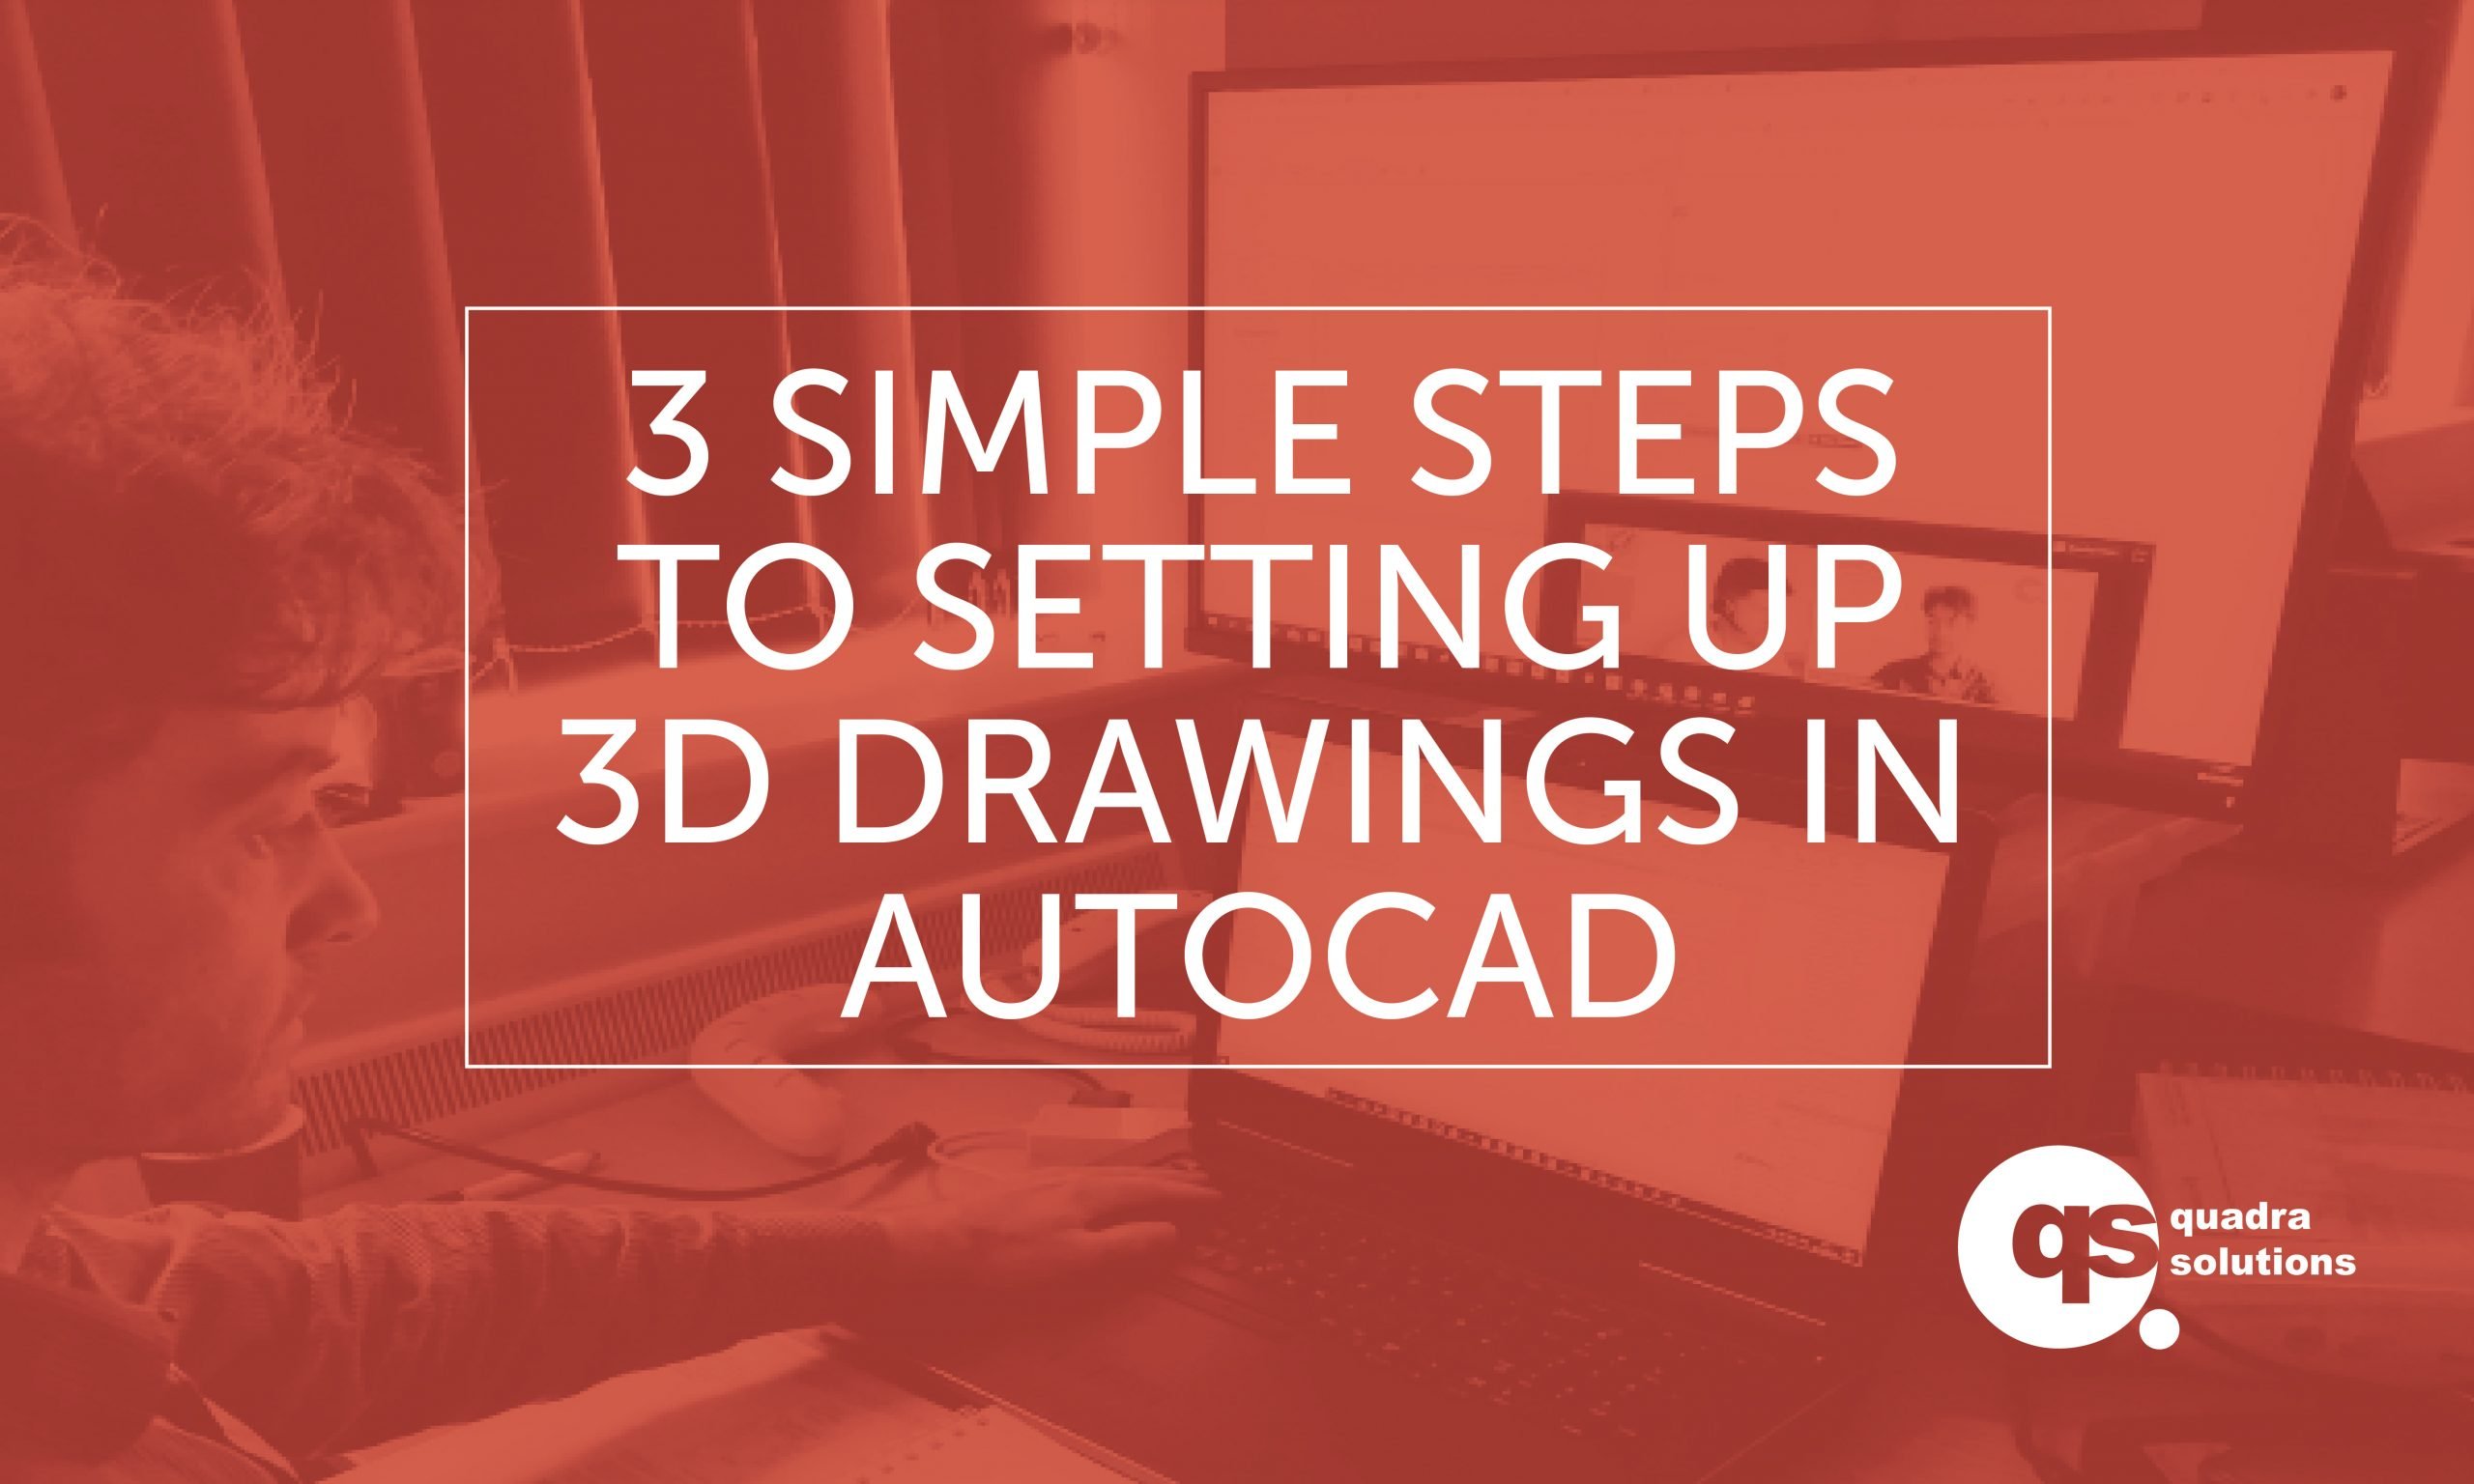 3 Simple Steps to Setting up 3D Drawings in AutoCAD